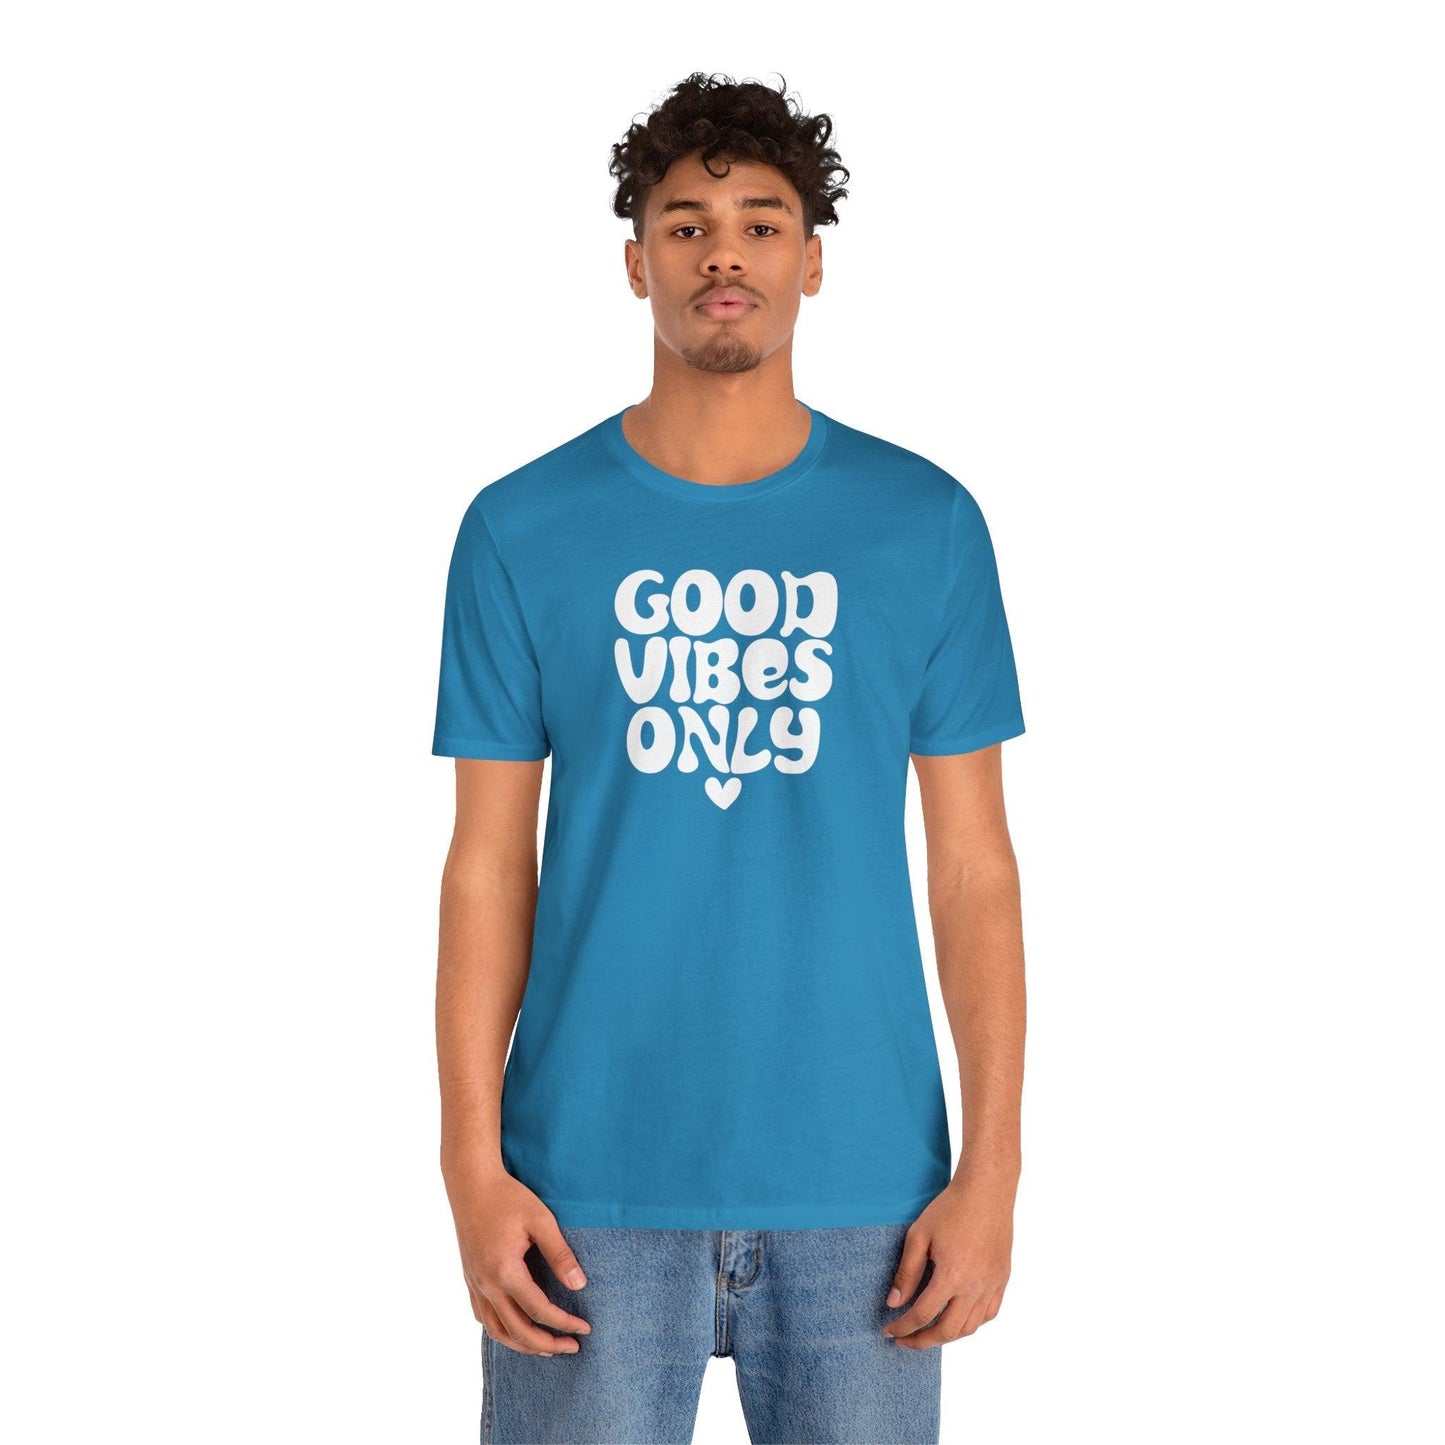 Good Vibes Only - Wicked Naughty Apparel